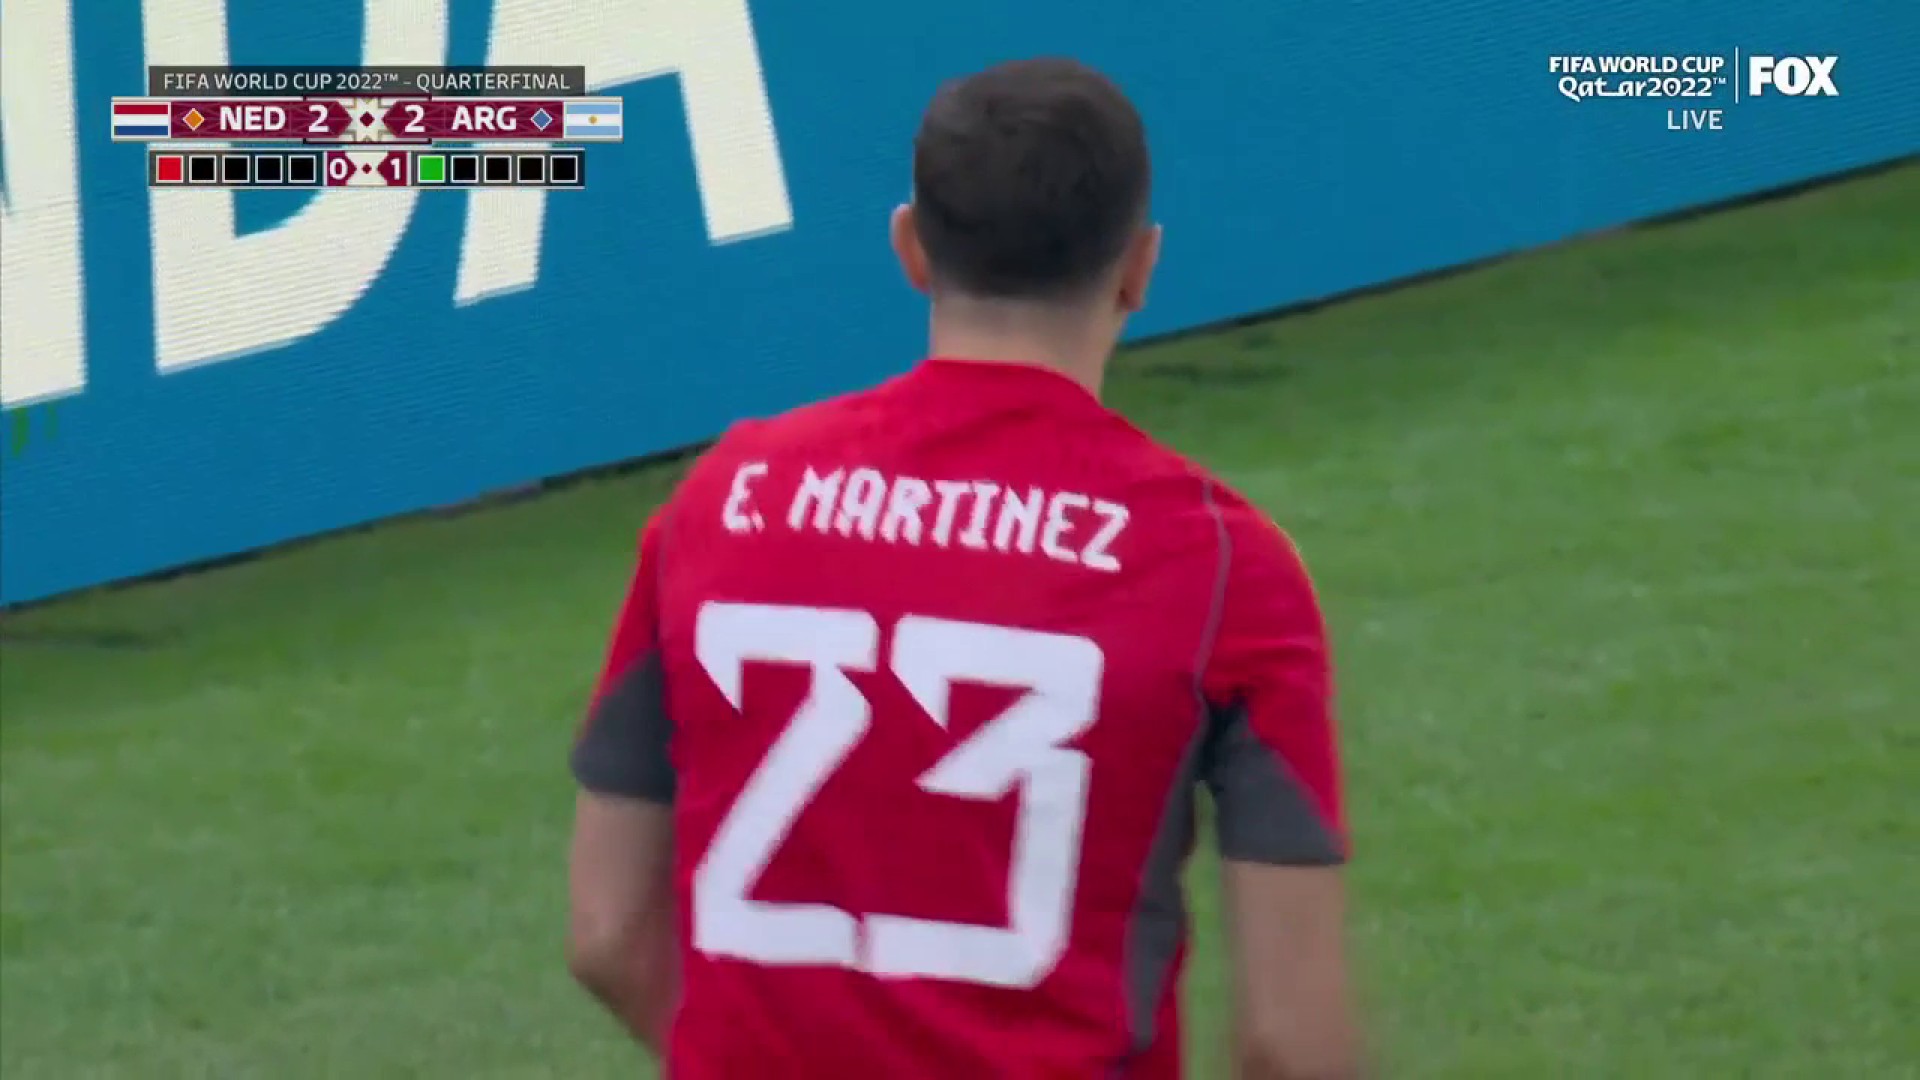 ANOTHER SAVE BY MARTINEZ 

Netherlands: ❌❌
Argentina: ✅”